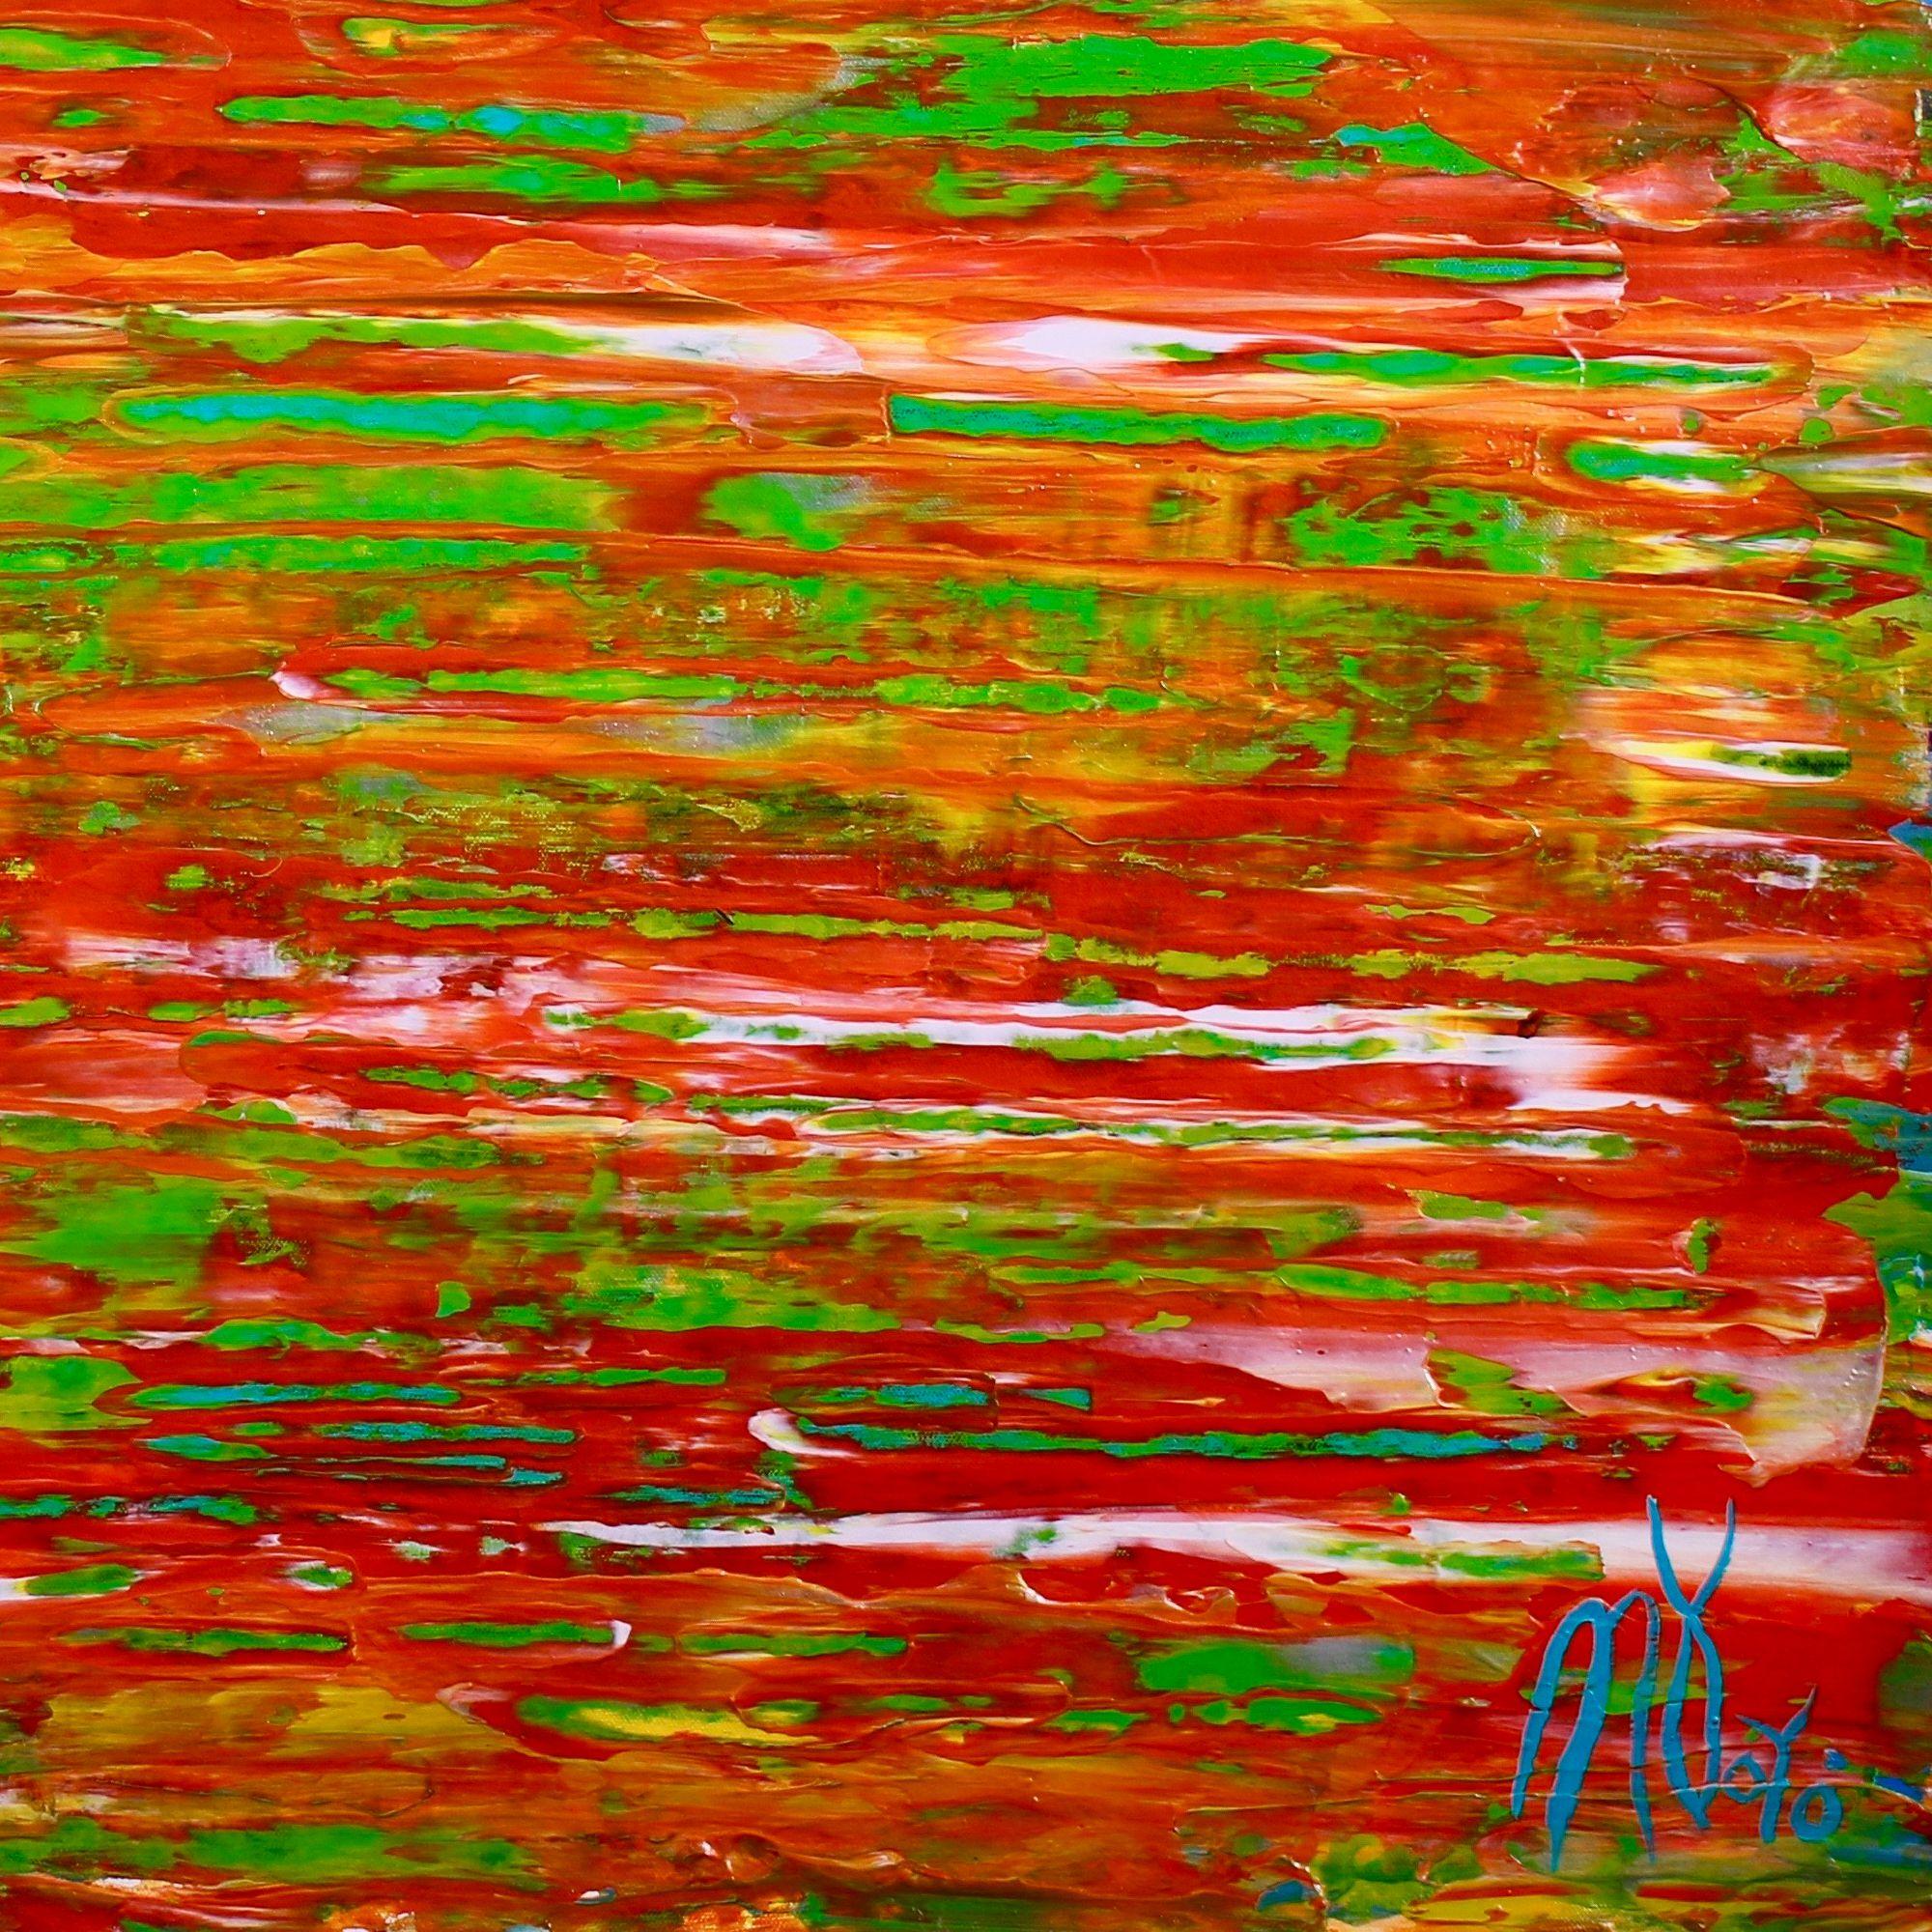 Bold color combination abstract expressionistic artwork, many shades of orange, yellow, green and some teal and silver. signed.    ORIGINAL FINE ABSTRACTS - ONE OF A KIND!  I only make original works. Each is a one of a kind so you will have the